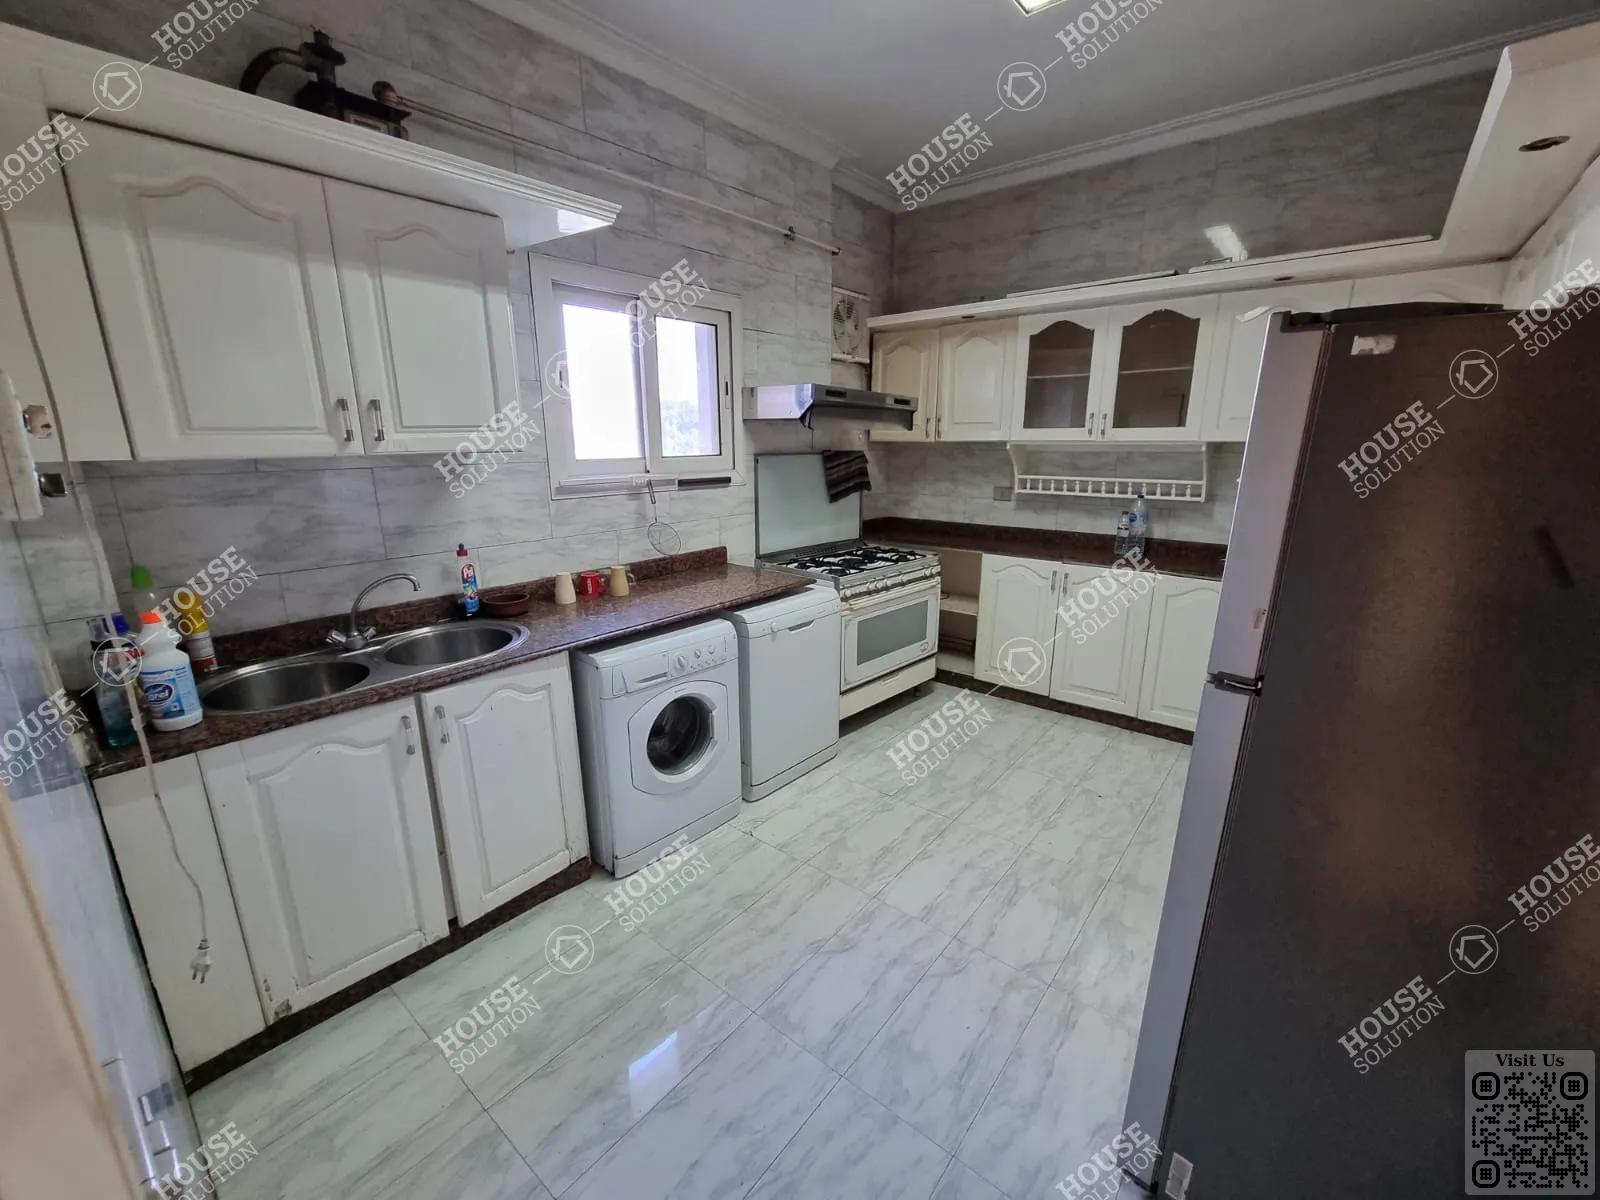 KITCHEN  @ Apartments For Rent In Maadi Maadi Degla Area: 200 m² consists of 4 Bedrooms 3 Bathrooms Furnished 5 stars #4188-1